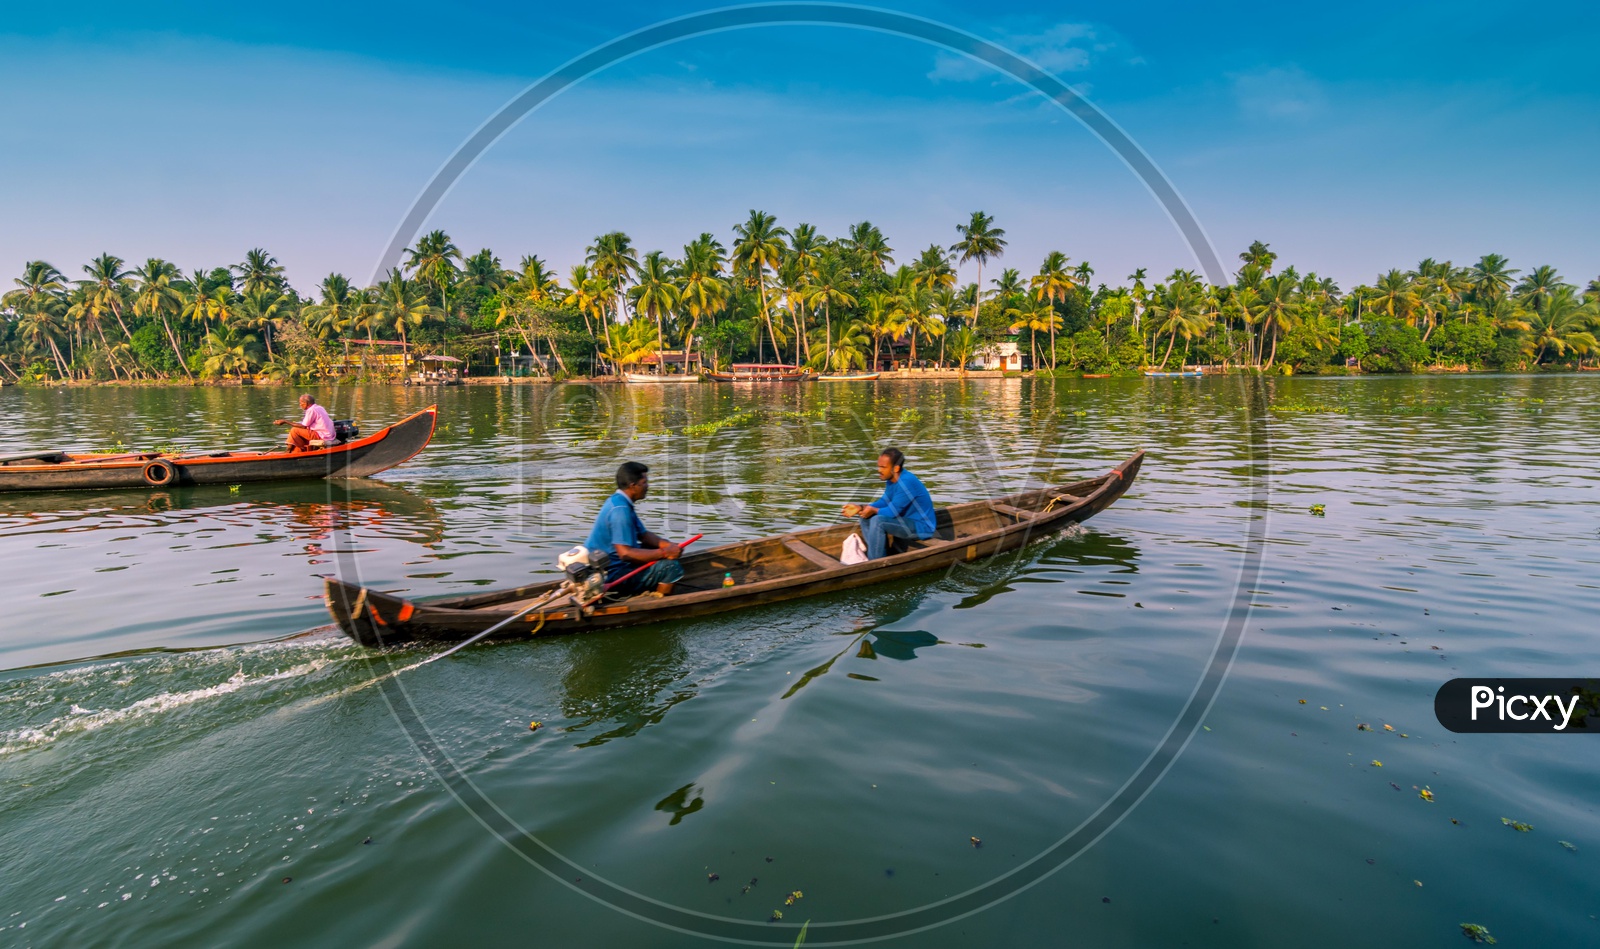 Indian men traveling on a boat on the backwaters